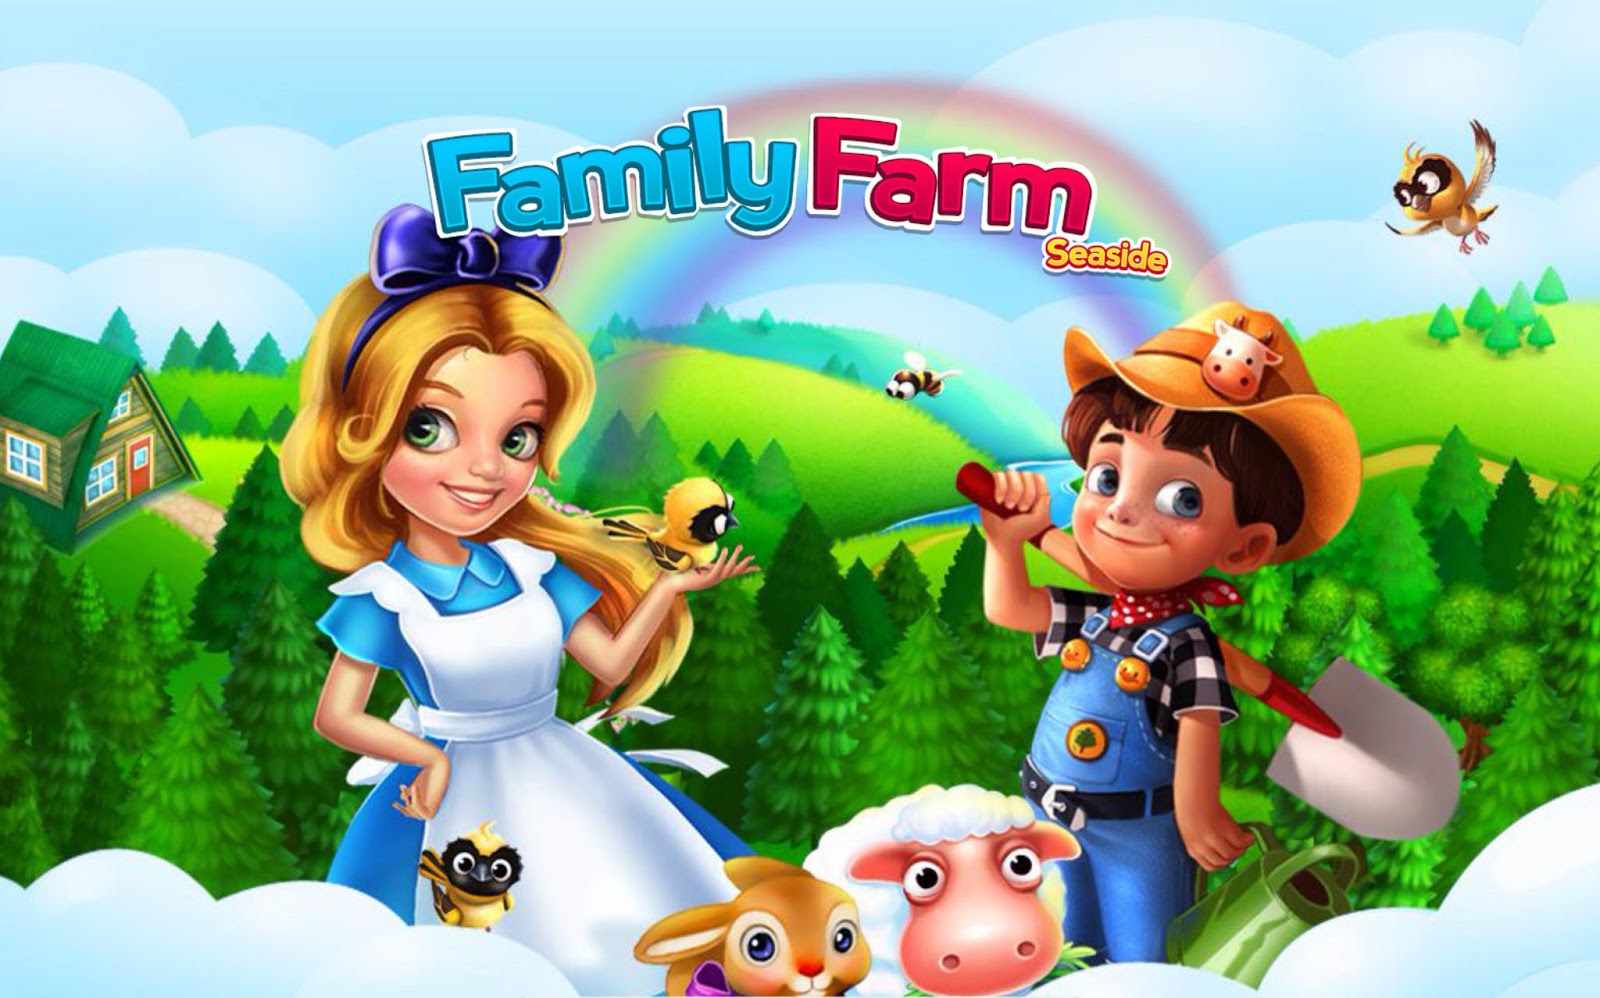 Family Farm Seaside Unlimited Coins, RC and OP Hack Tool 100% Working